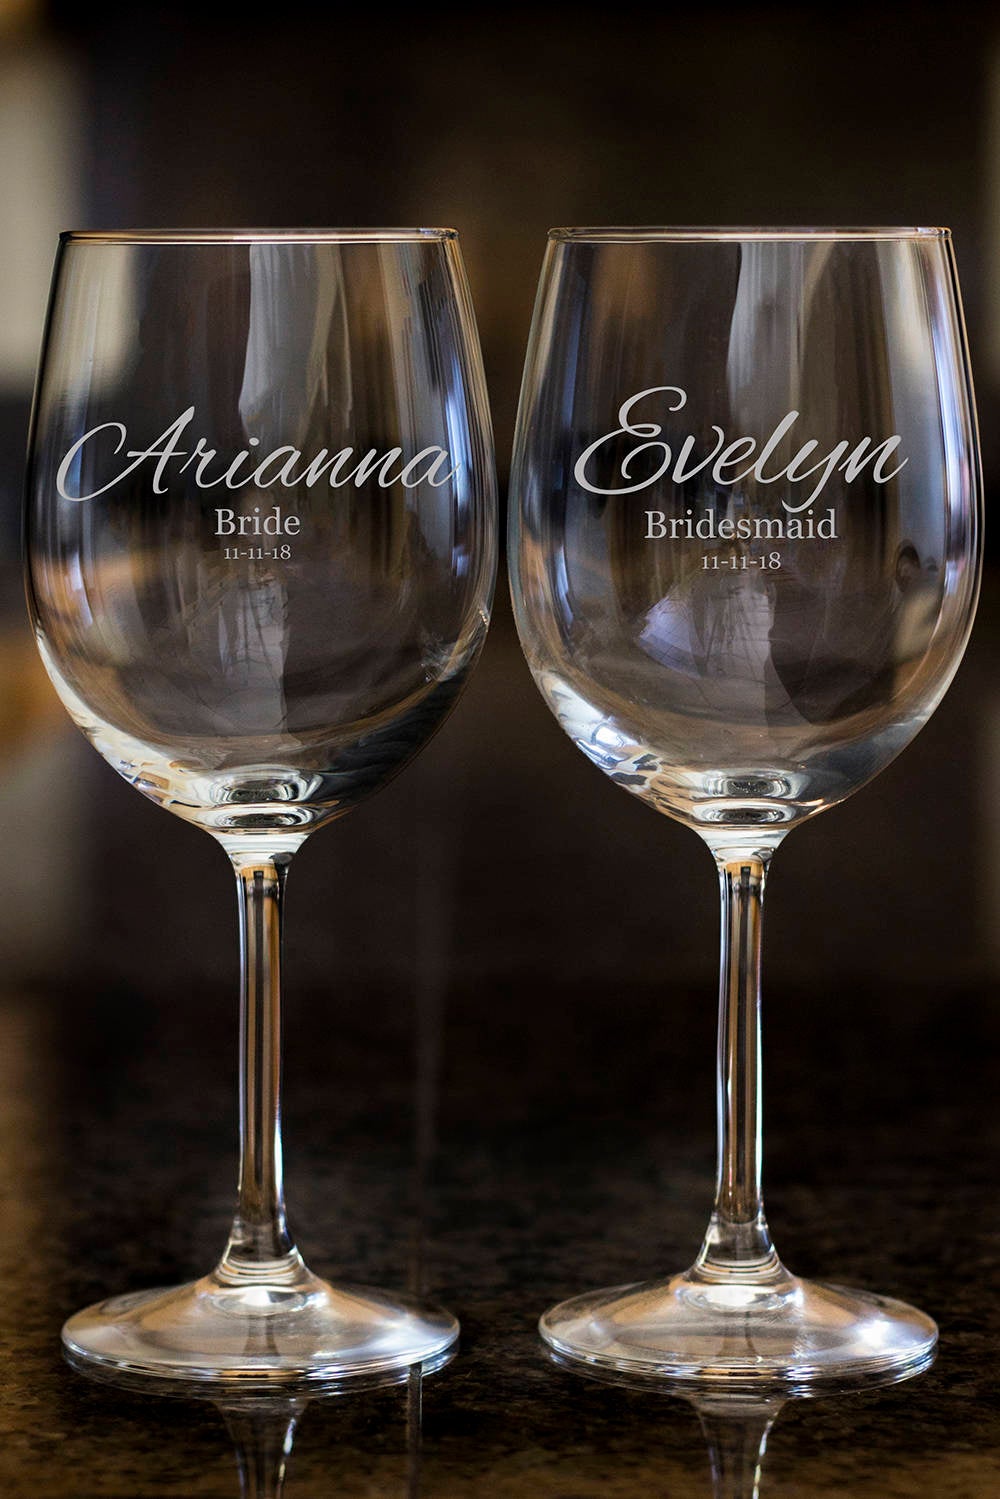 Bridesmaid wine glasses,Personalize wine glasses,Engraved wine glasses, etched Wine glasses,wedding gift, Bachelor party, Bridal shower gift